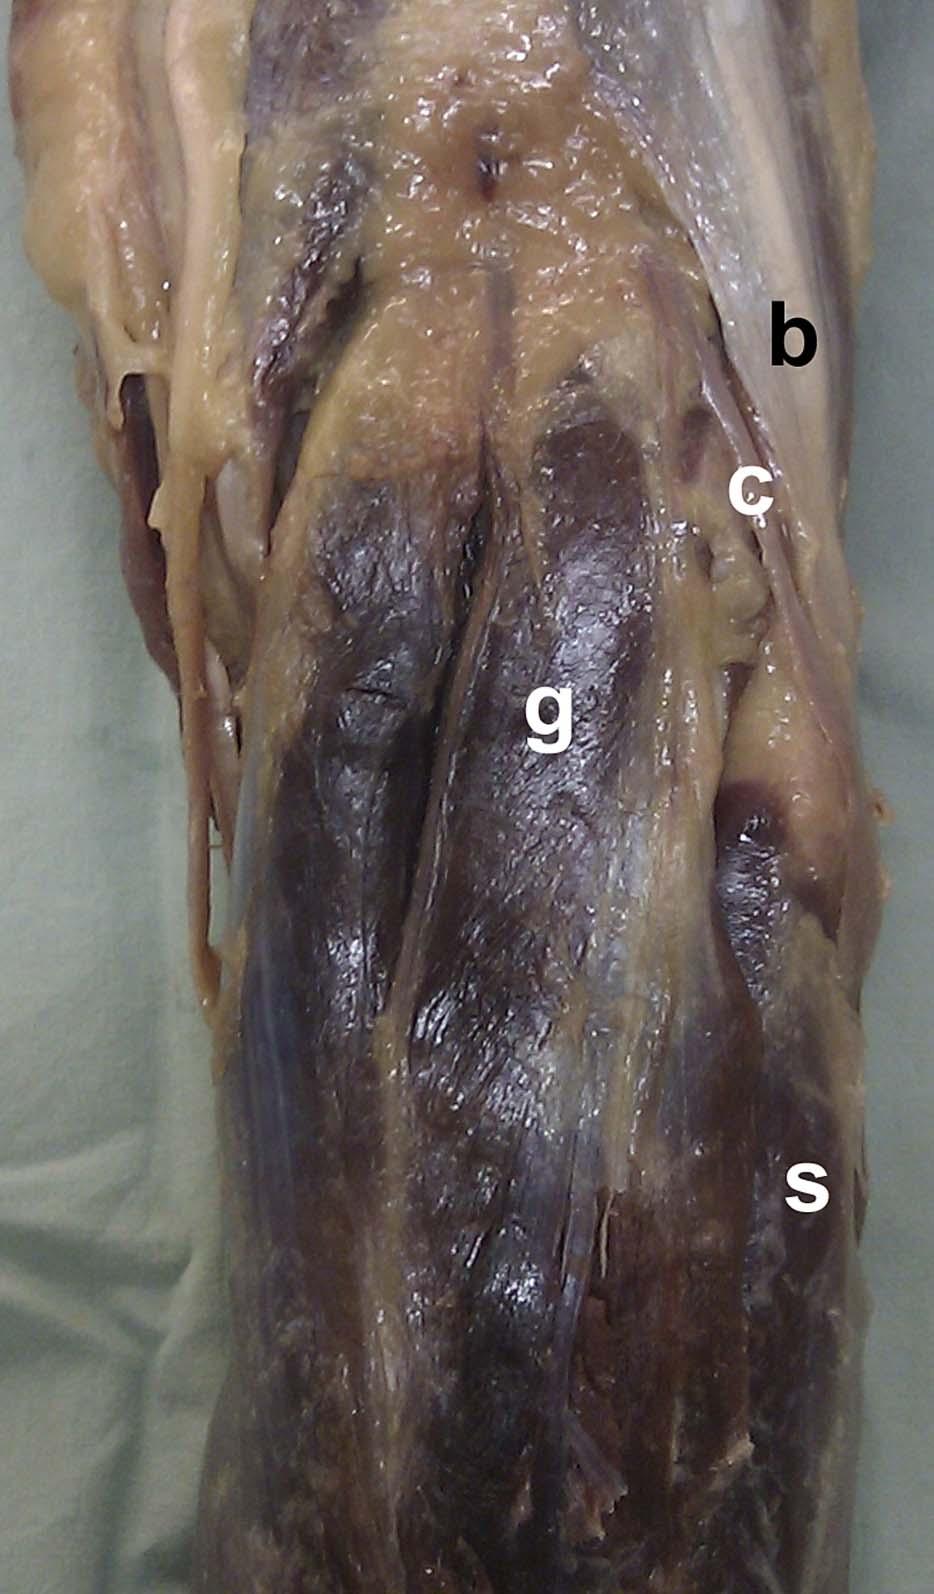 Heidari et al J Orthop Trauma Volume 27, Number 4, April 2013 FIGURE 1. Posterior aspect of the right knee with skin and superficial fascia removed.